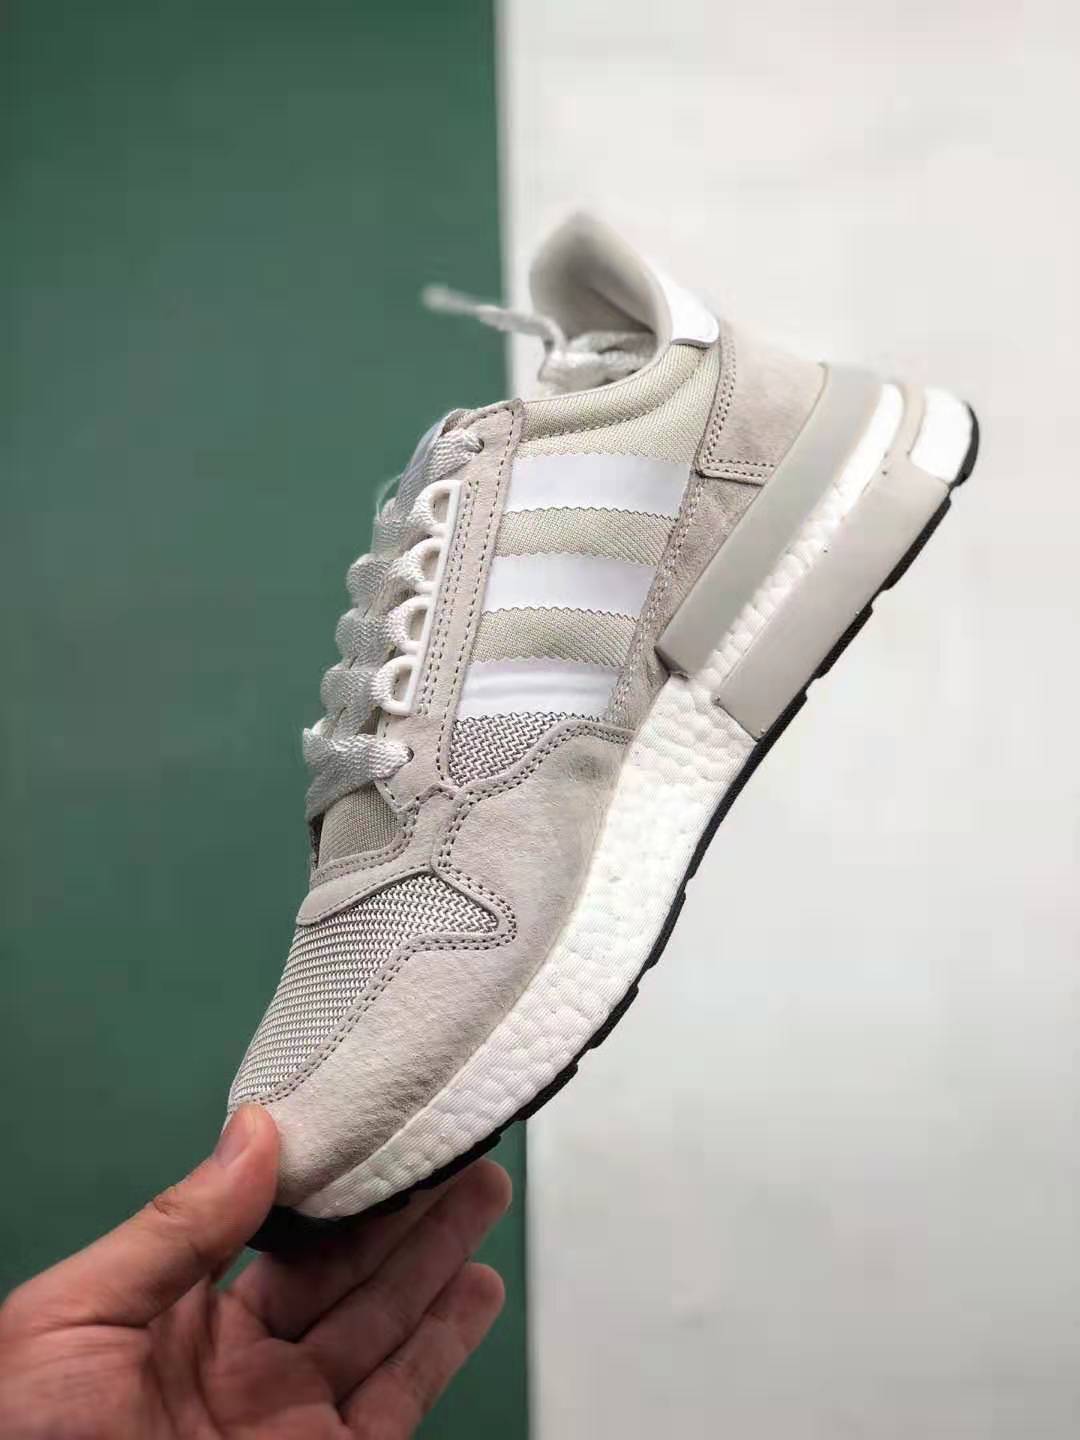 Adidas ZX 500 RM 'Running White' B42226 - Stylish & Comfortable Sneakers